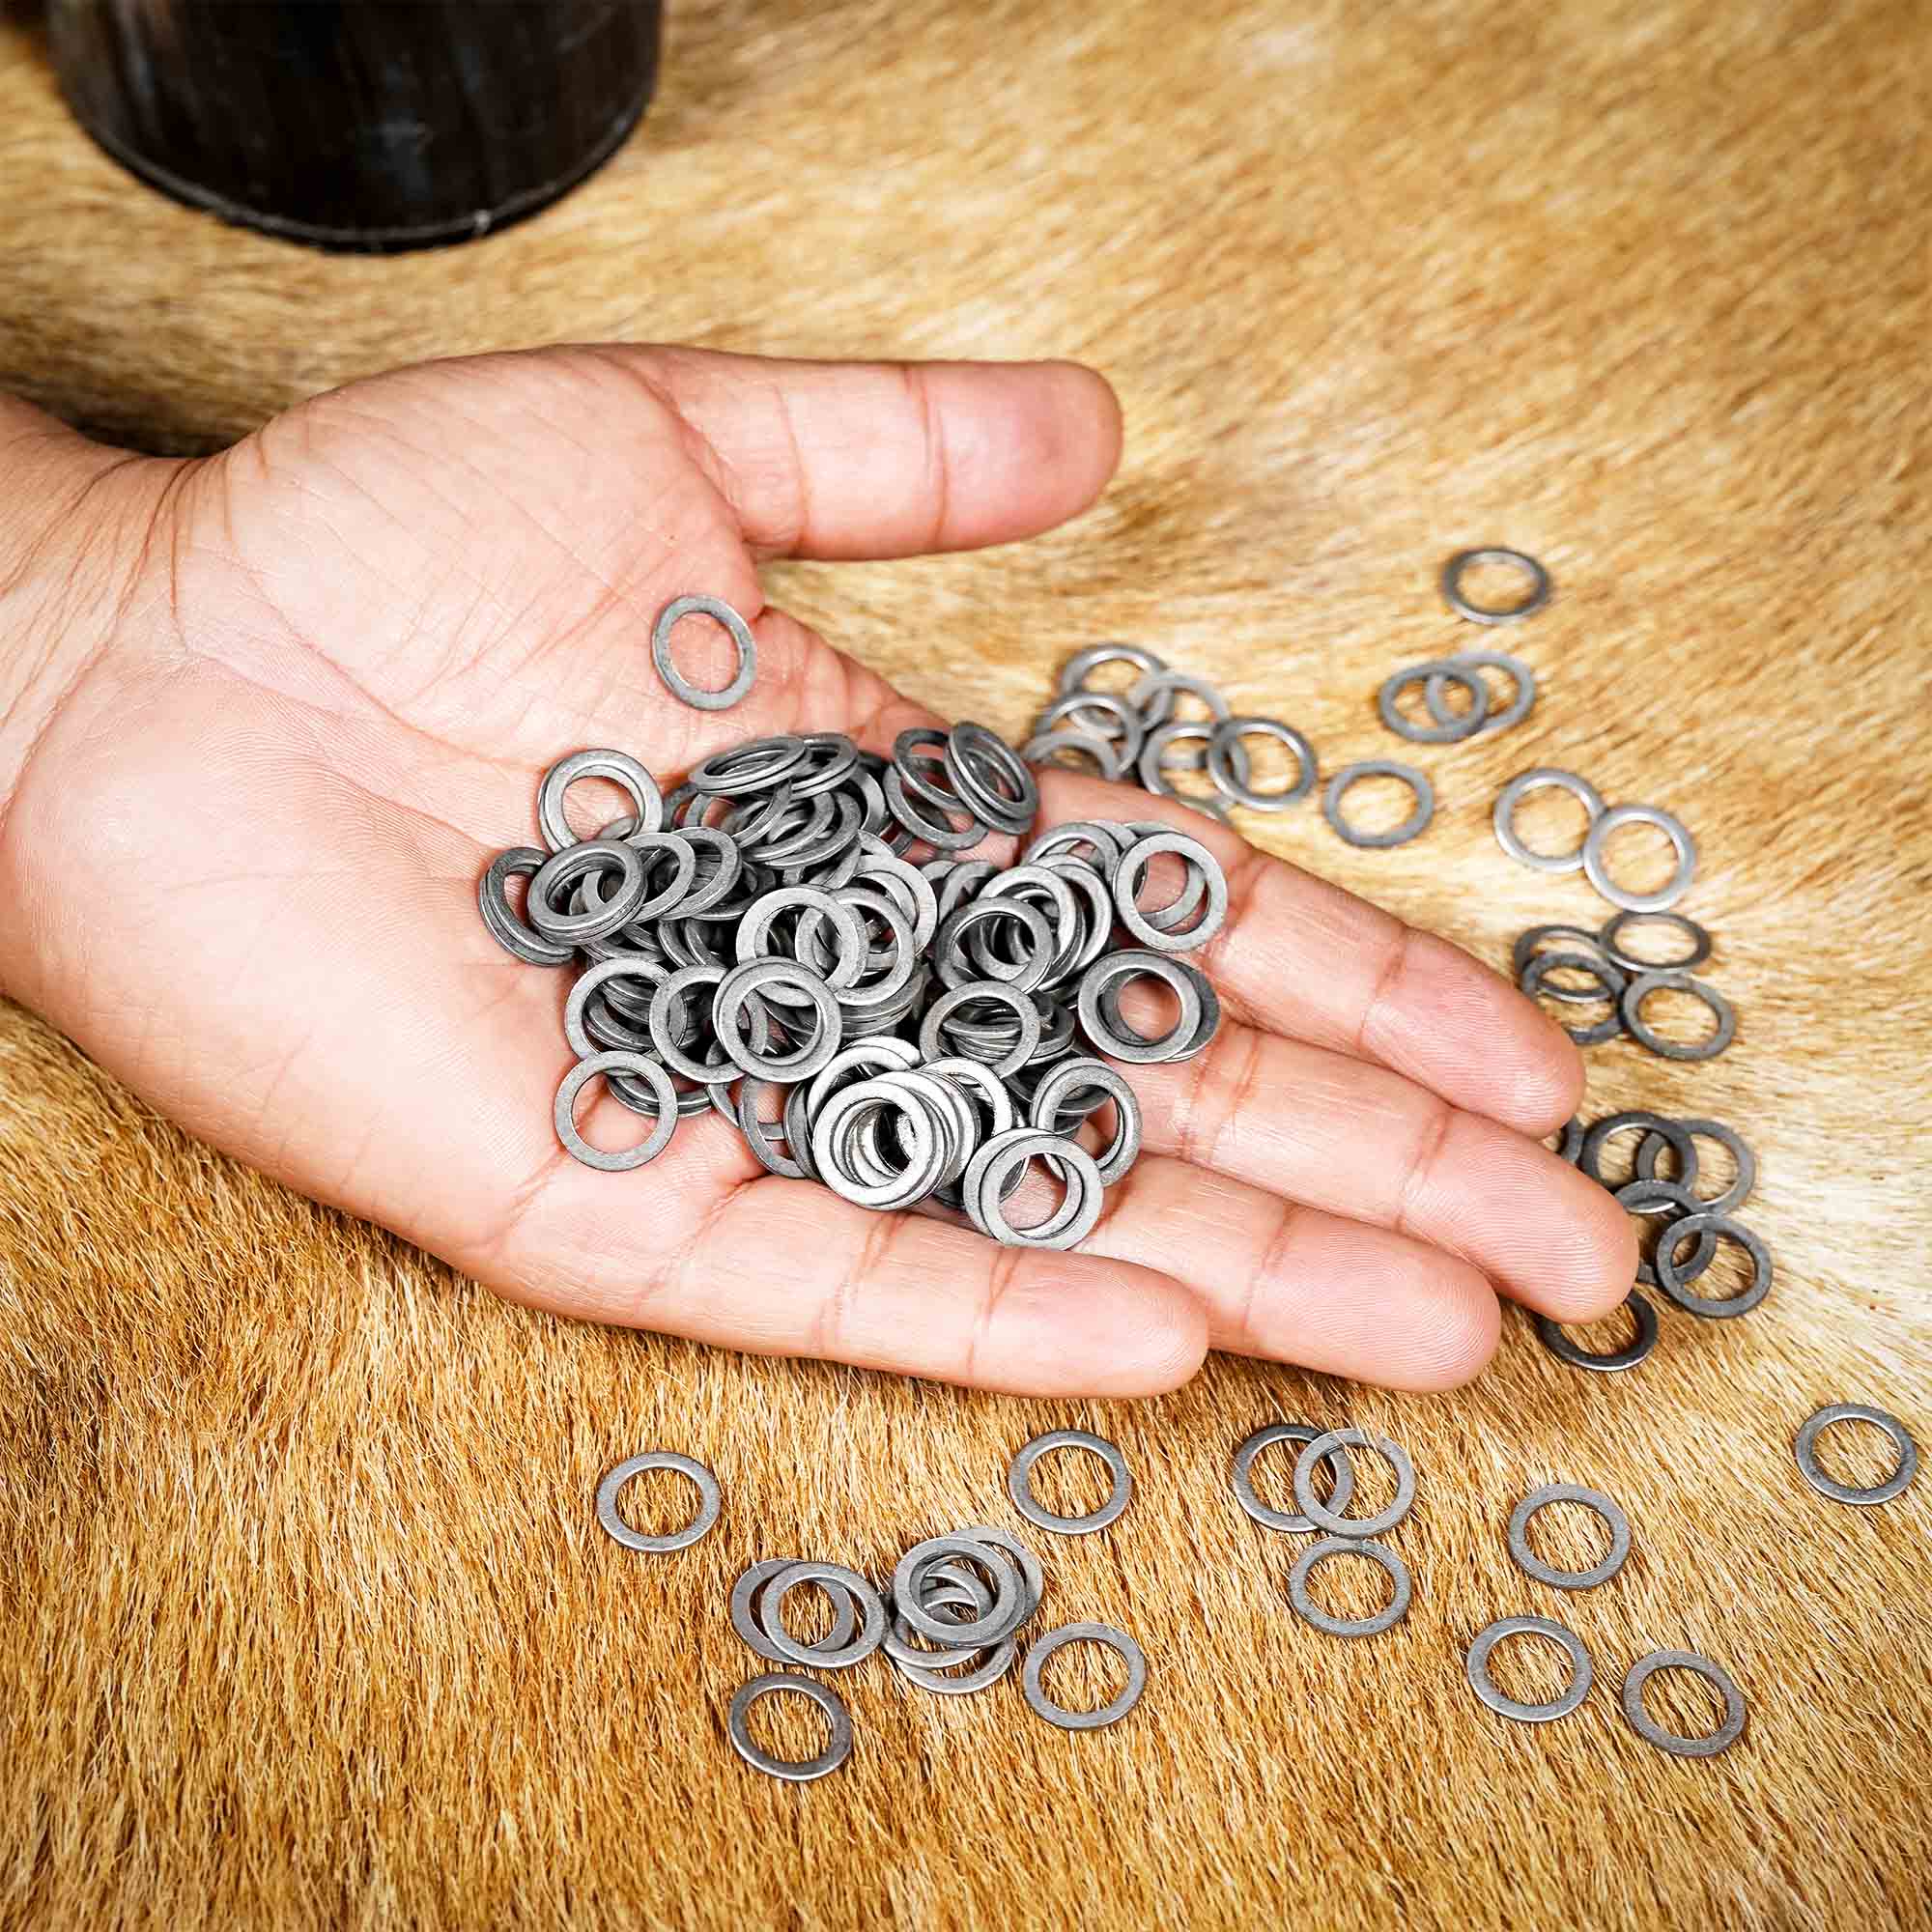 By The Sword, Inc. - Loose Chainmail Rings - Blackened Solid Flat Ring 6mm